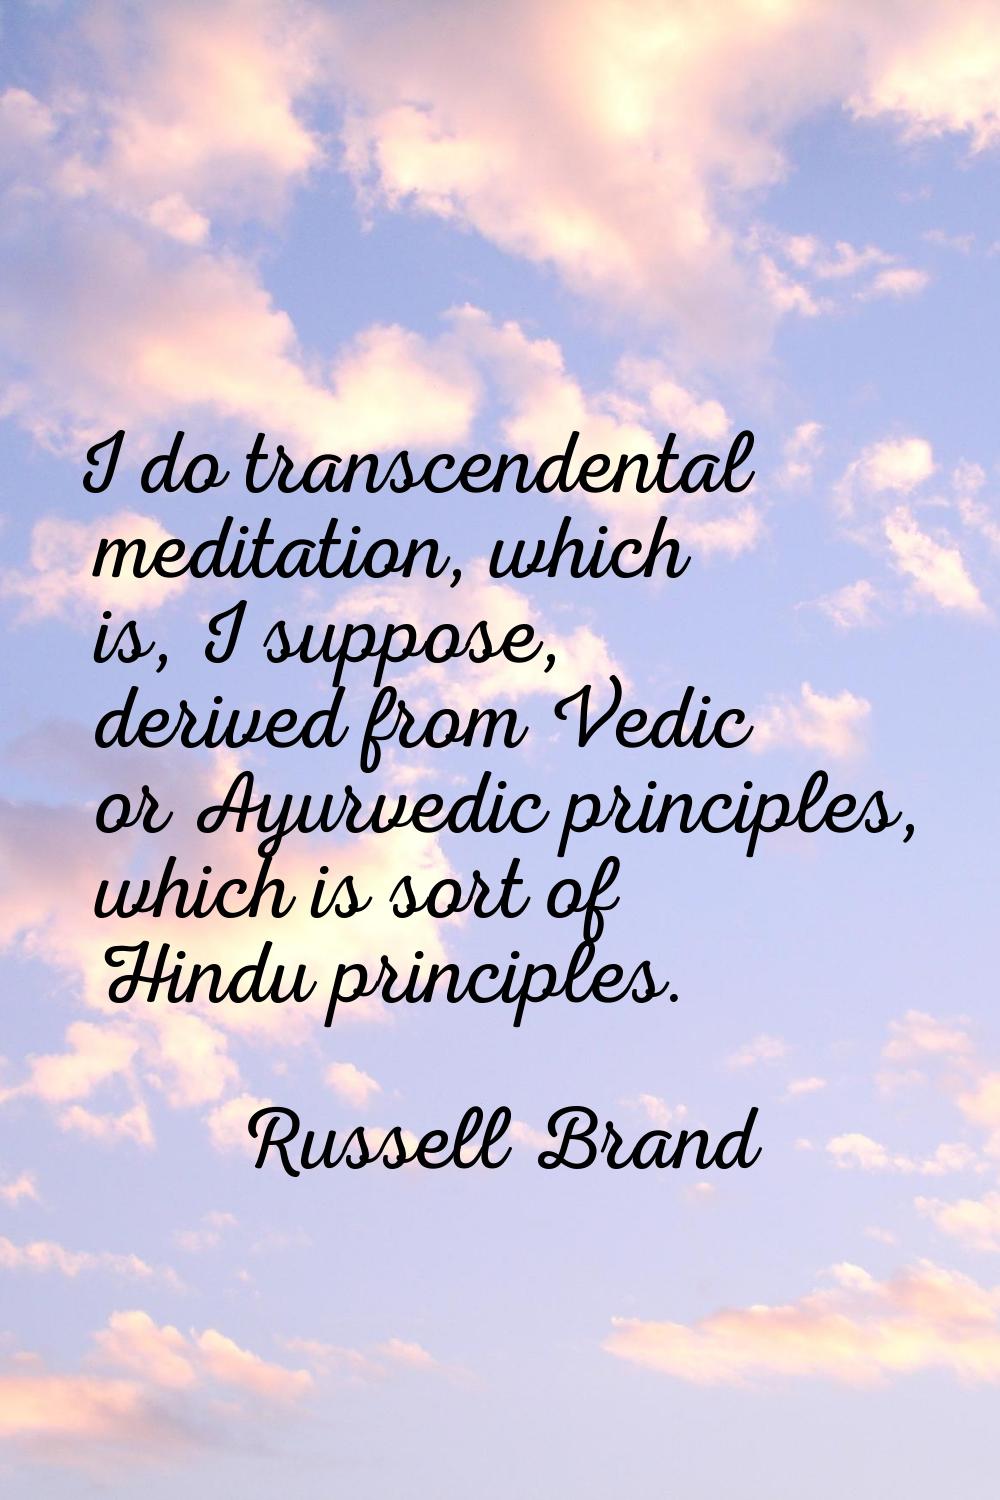 I do transcendental meditation, which is, I suppose, derived from Vedic or Ayurvedic principles, wh